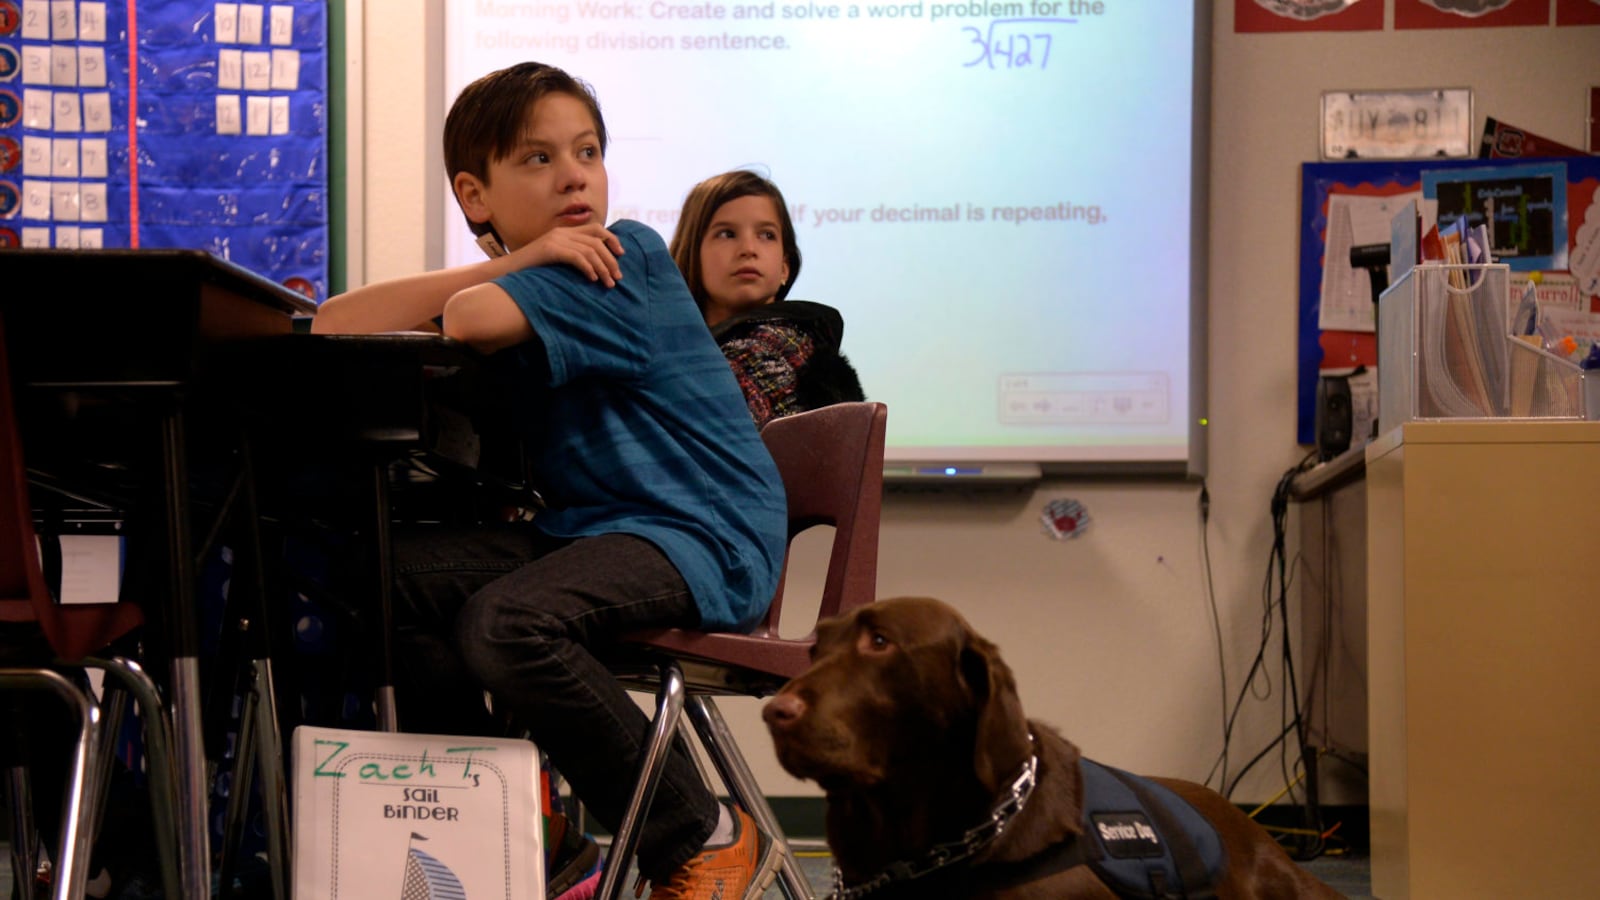 Zachary Tucker, a 5th grader in Colorado Springs, answers questions in class with his service dog, Clyde, in 2014. Clyde helps Zach with his Aspergers syndrome, a high functioning form of autism. (Photo By Joe Amon/The Denver Post via Getty Images)